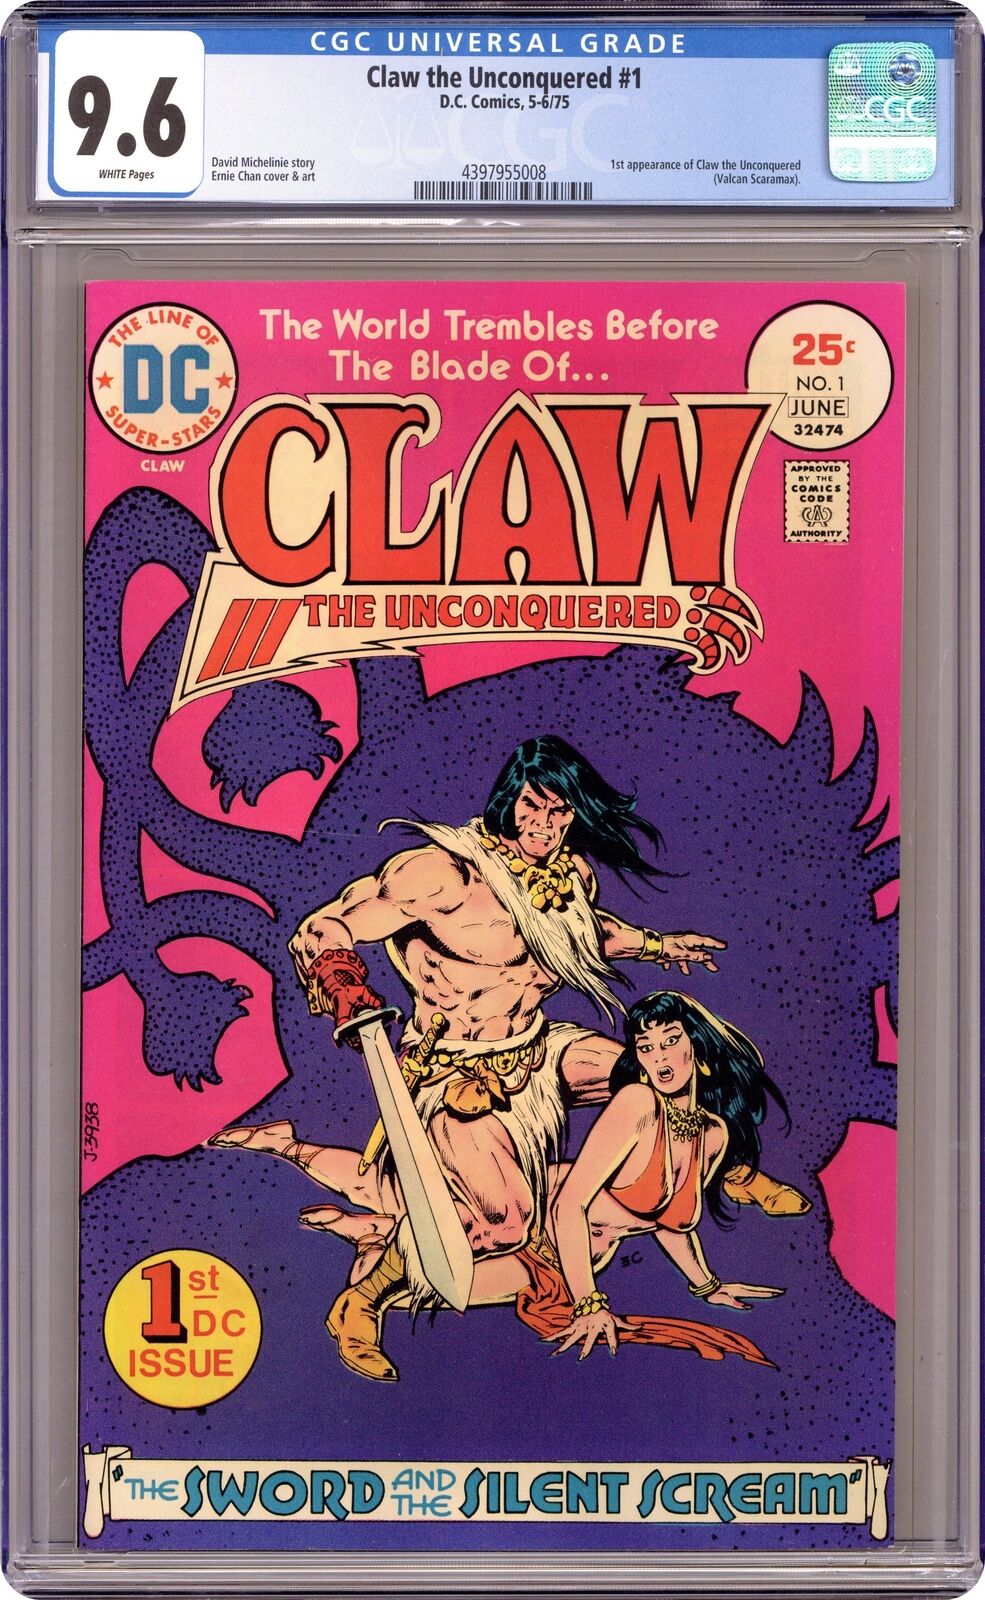 Claw the Unconquered #1 CGC 9.6 1975 4397955008 1st app. Claw